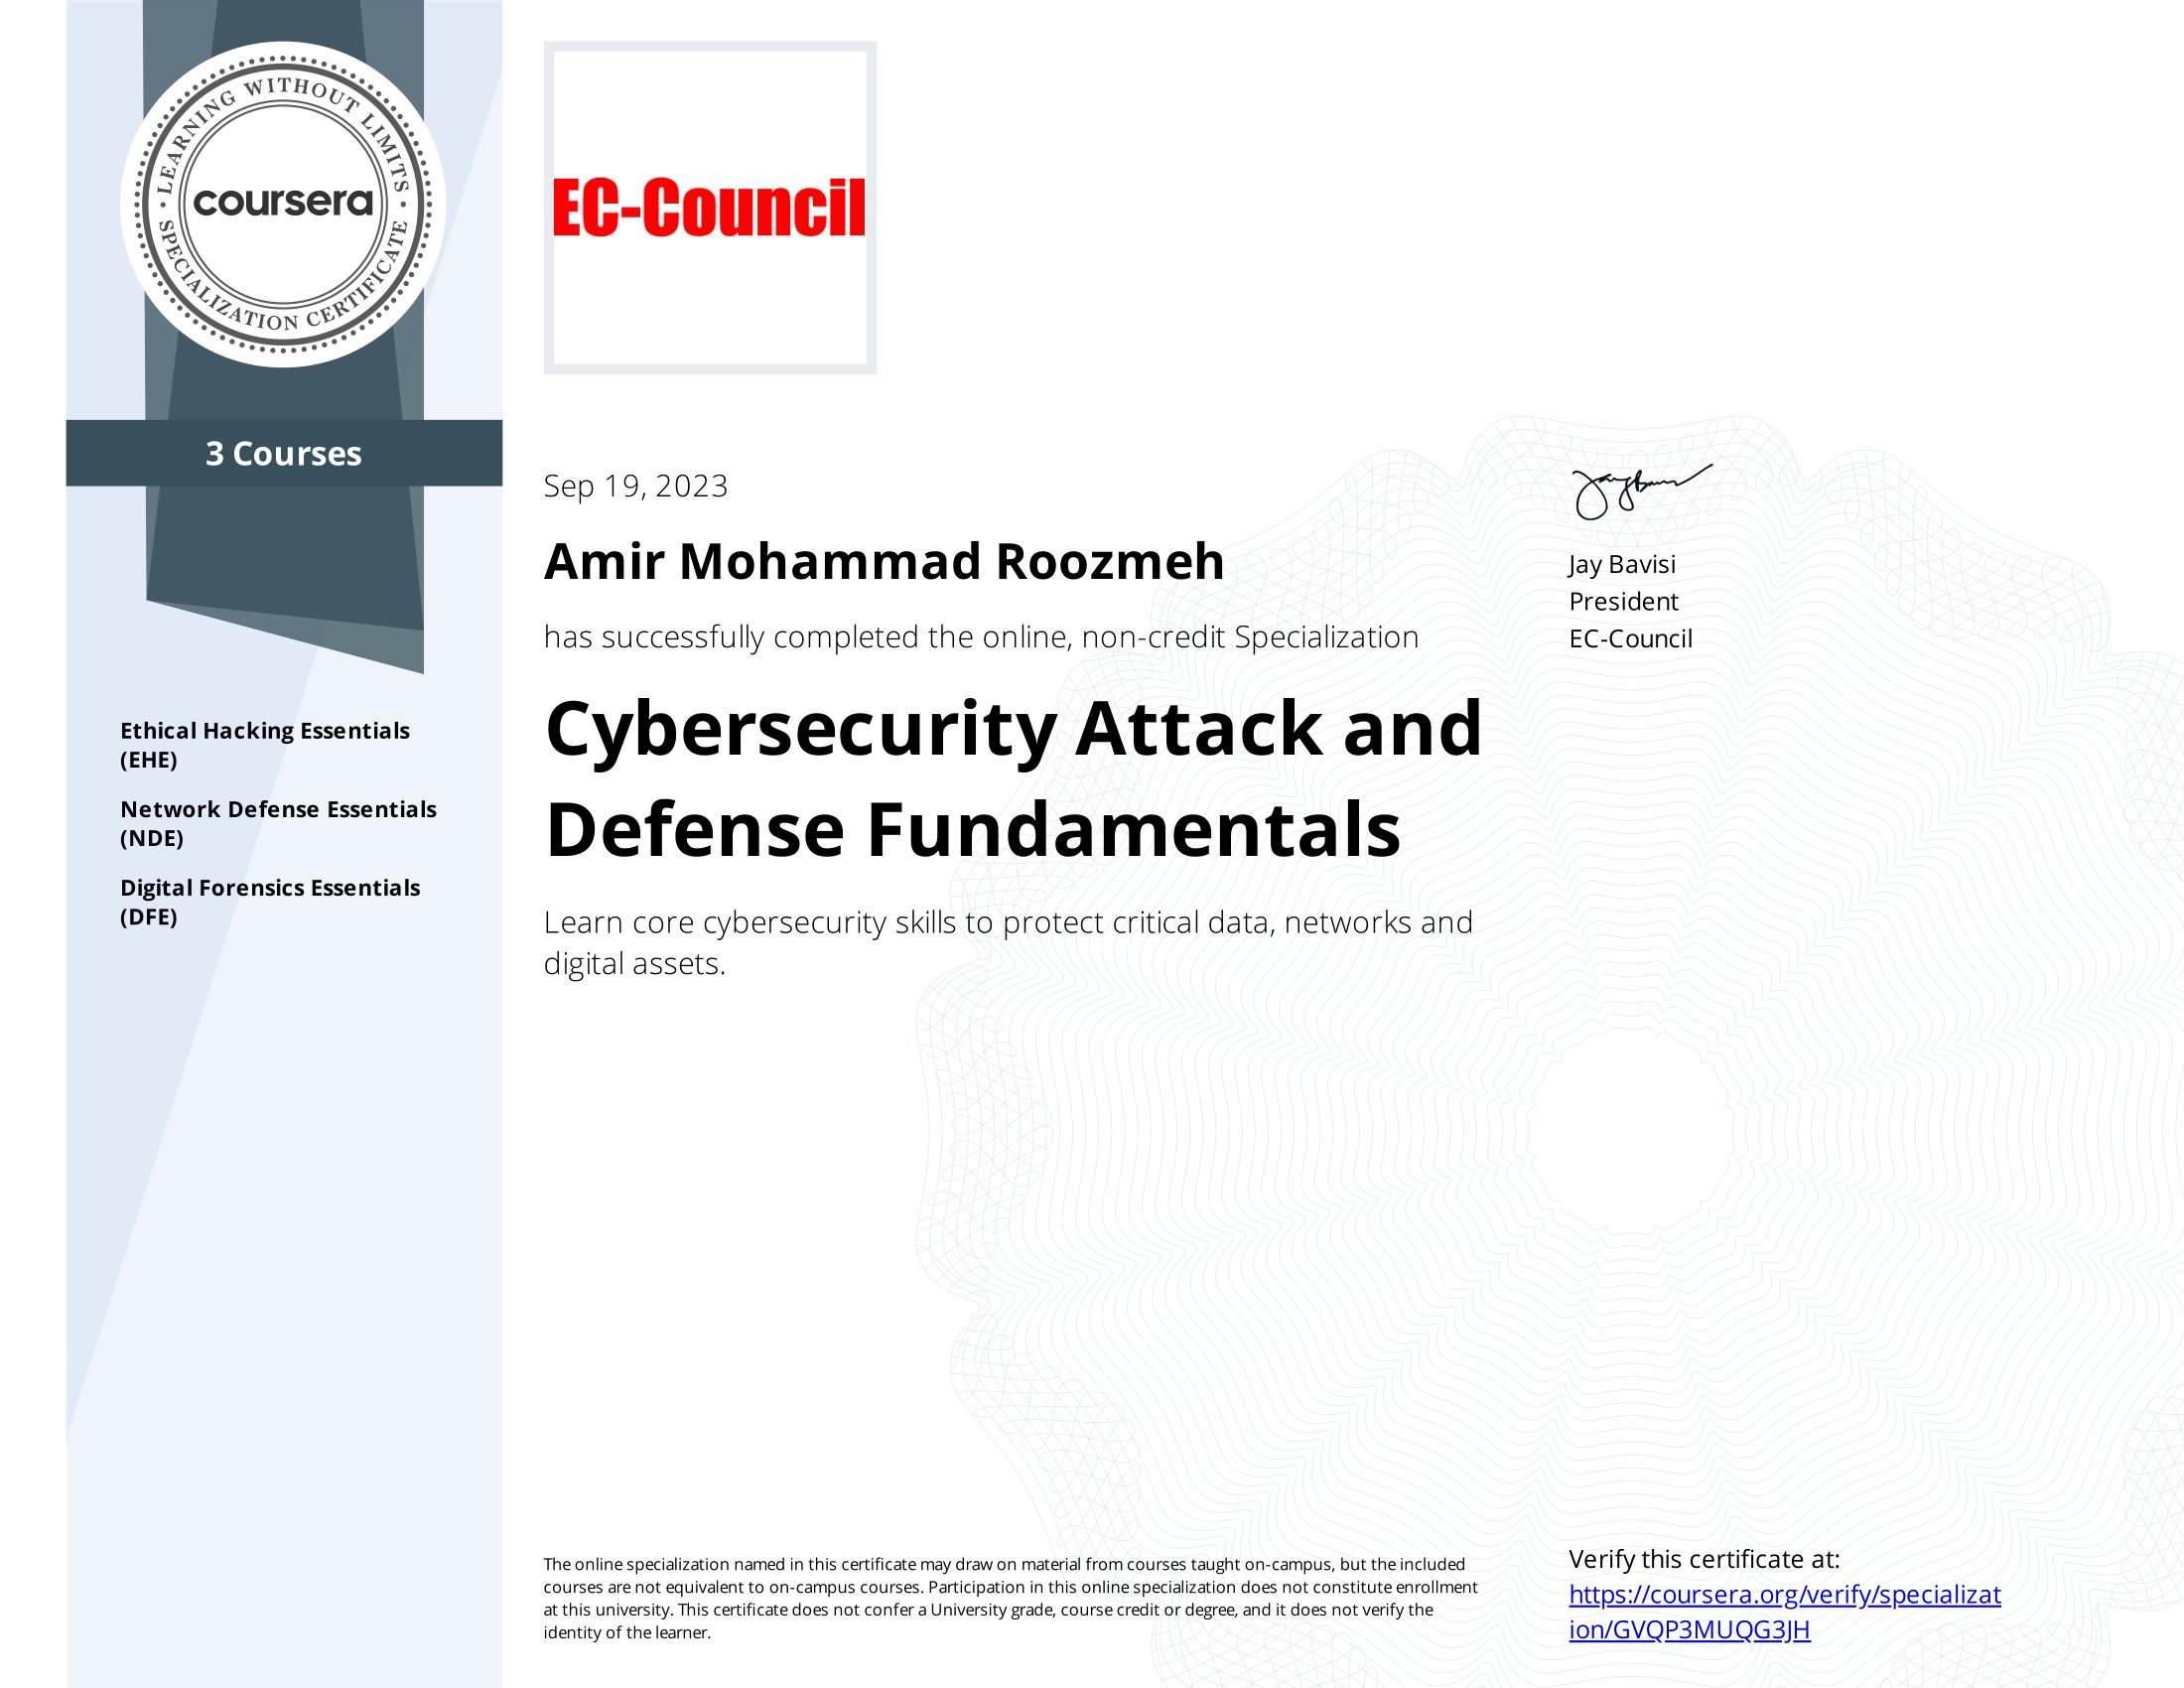 Cybersecurity Attack and Defence Fundamentals